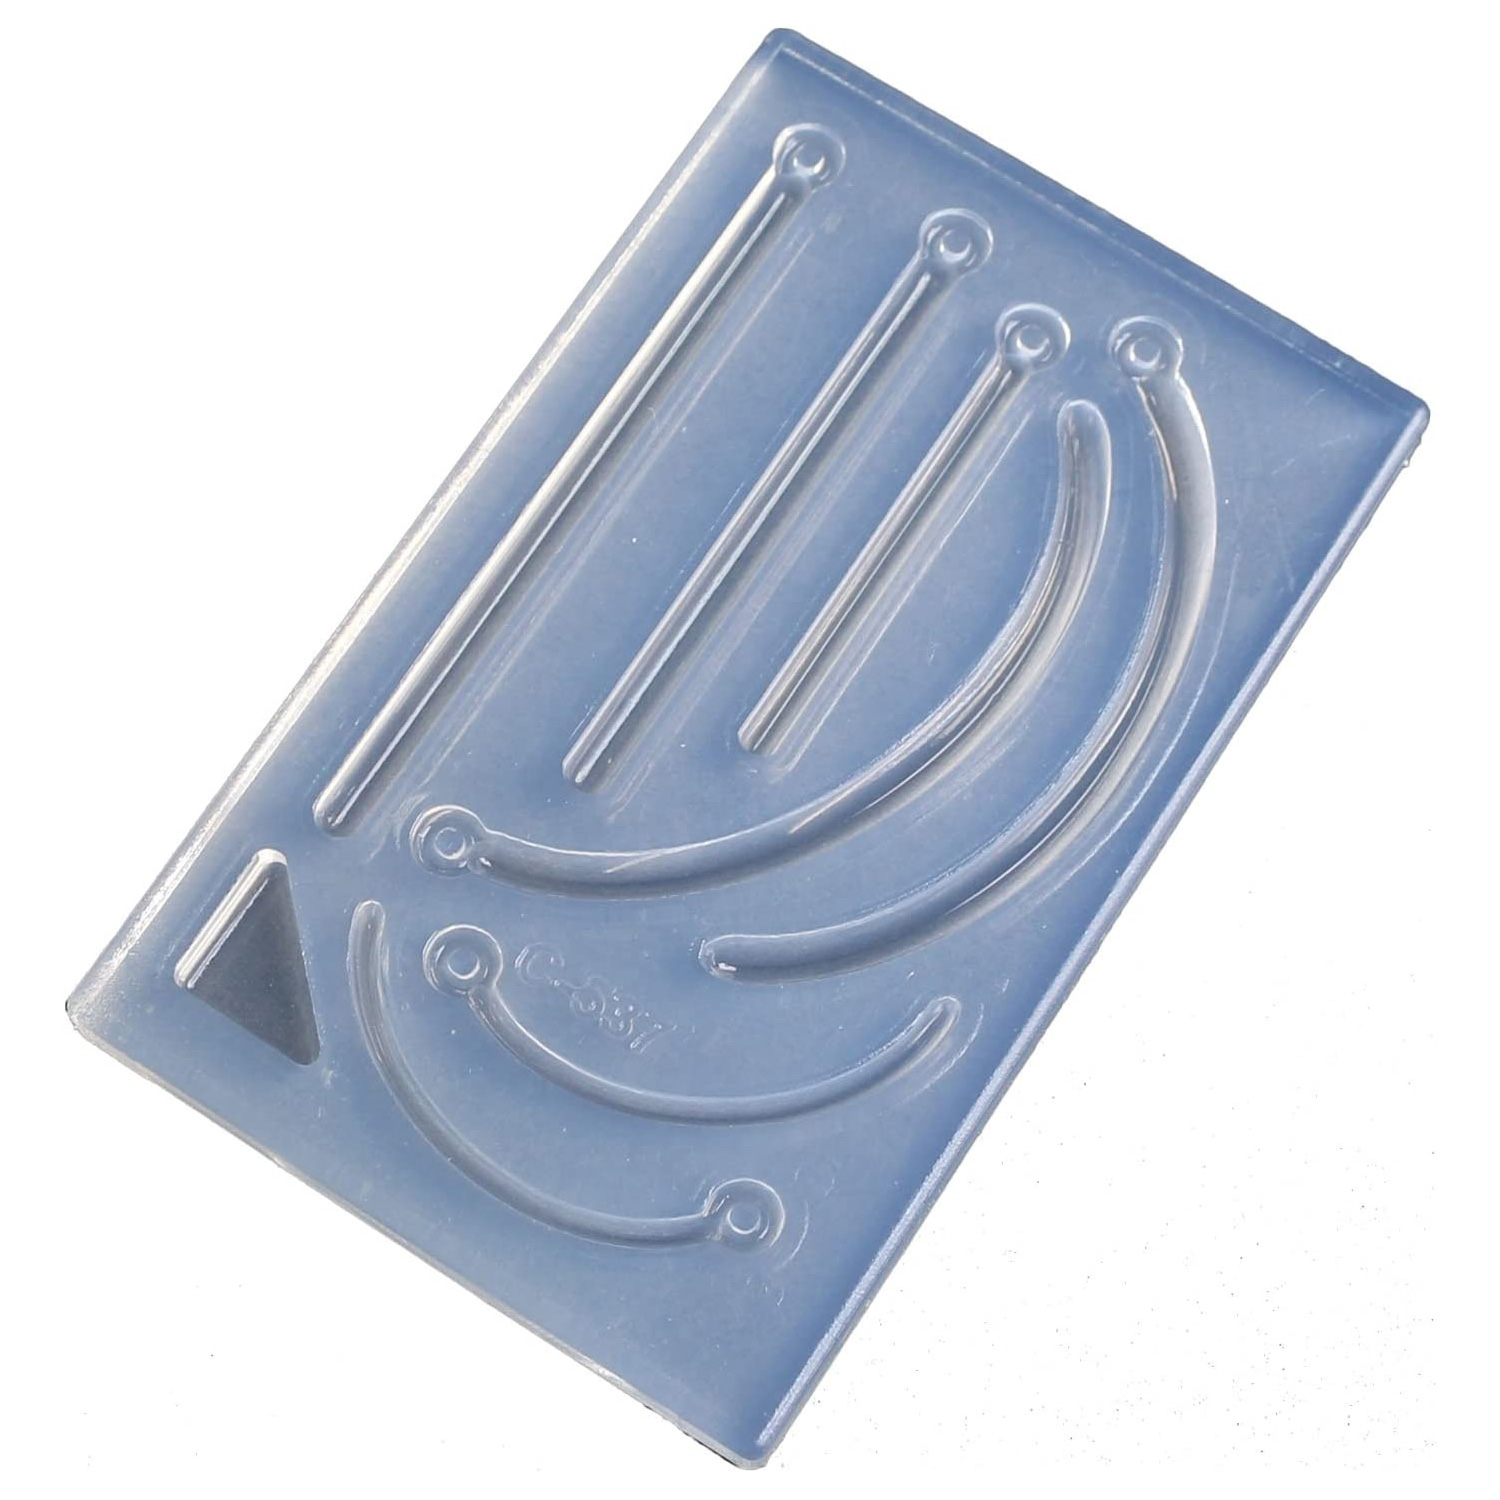 KAM-REJ-537  Resin Crafting Silicone Mold  (pcs)